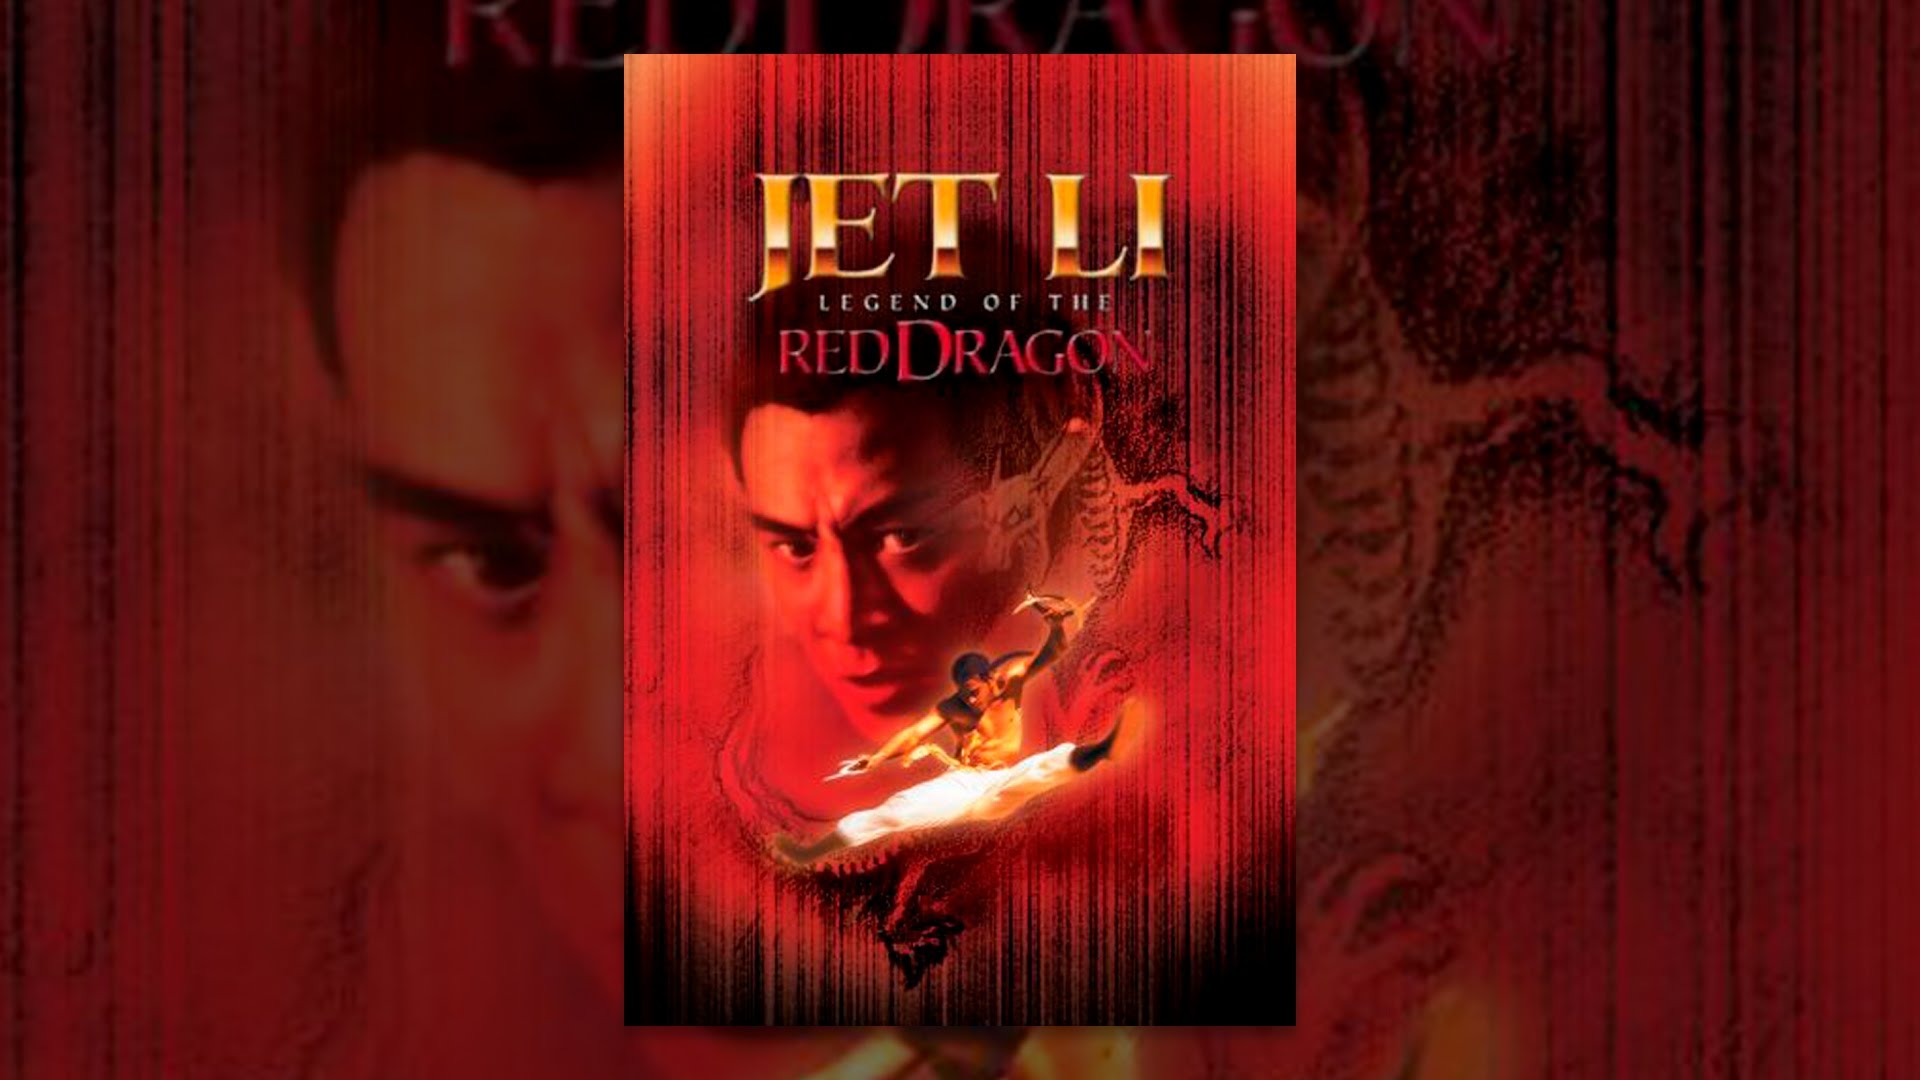  The Legend of the Red Dragon